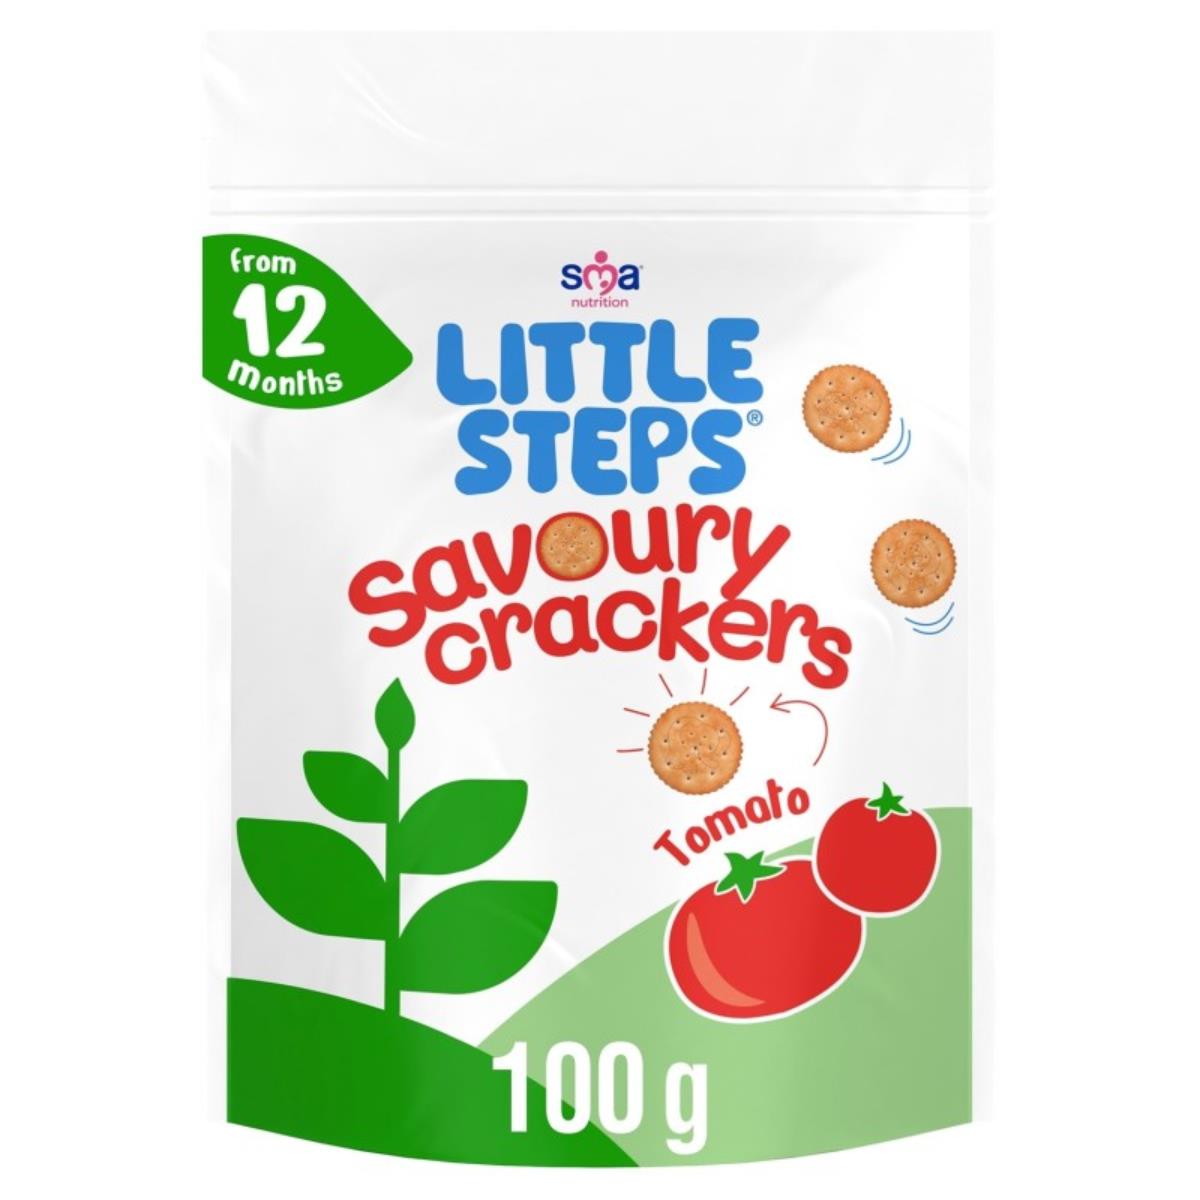 SMA Nutrition Little Steps Savoury Crackers Tomato (12m+) - 100g